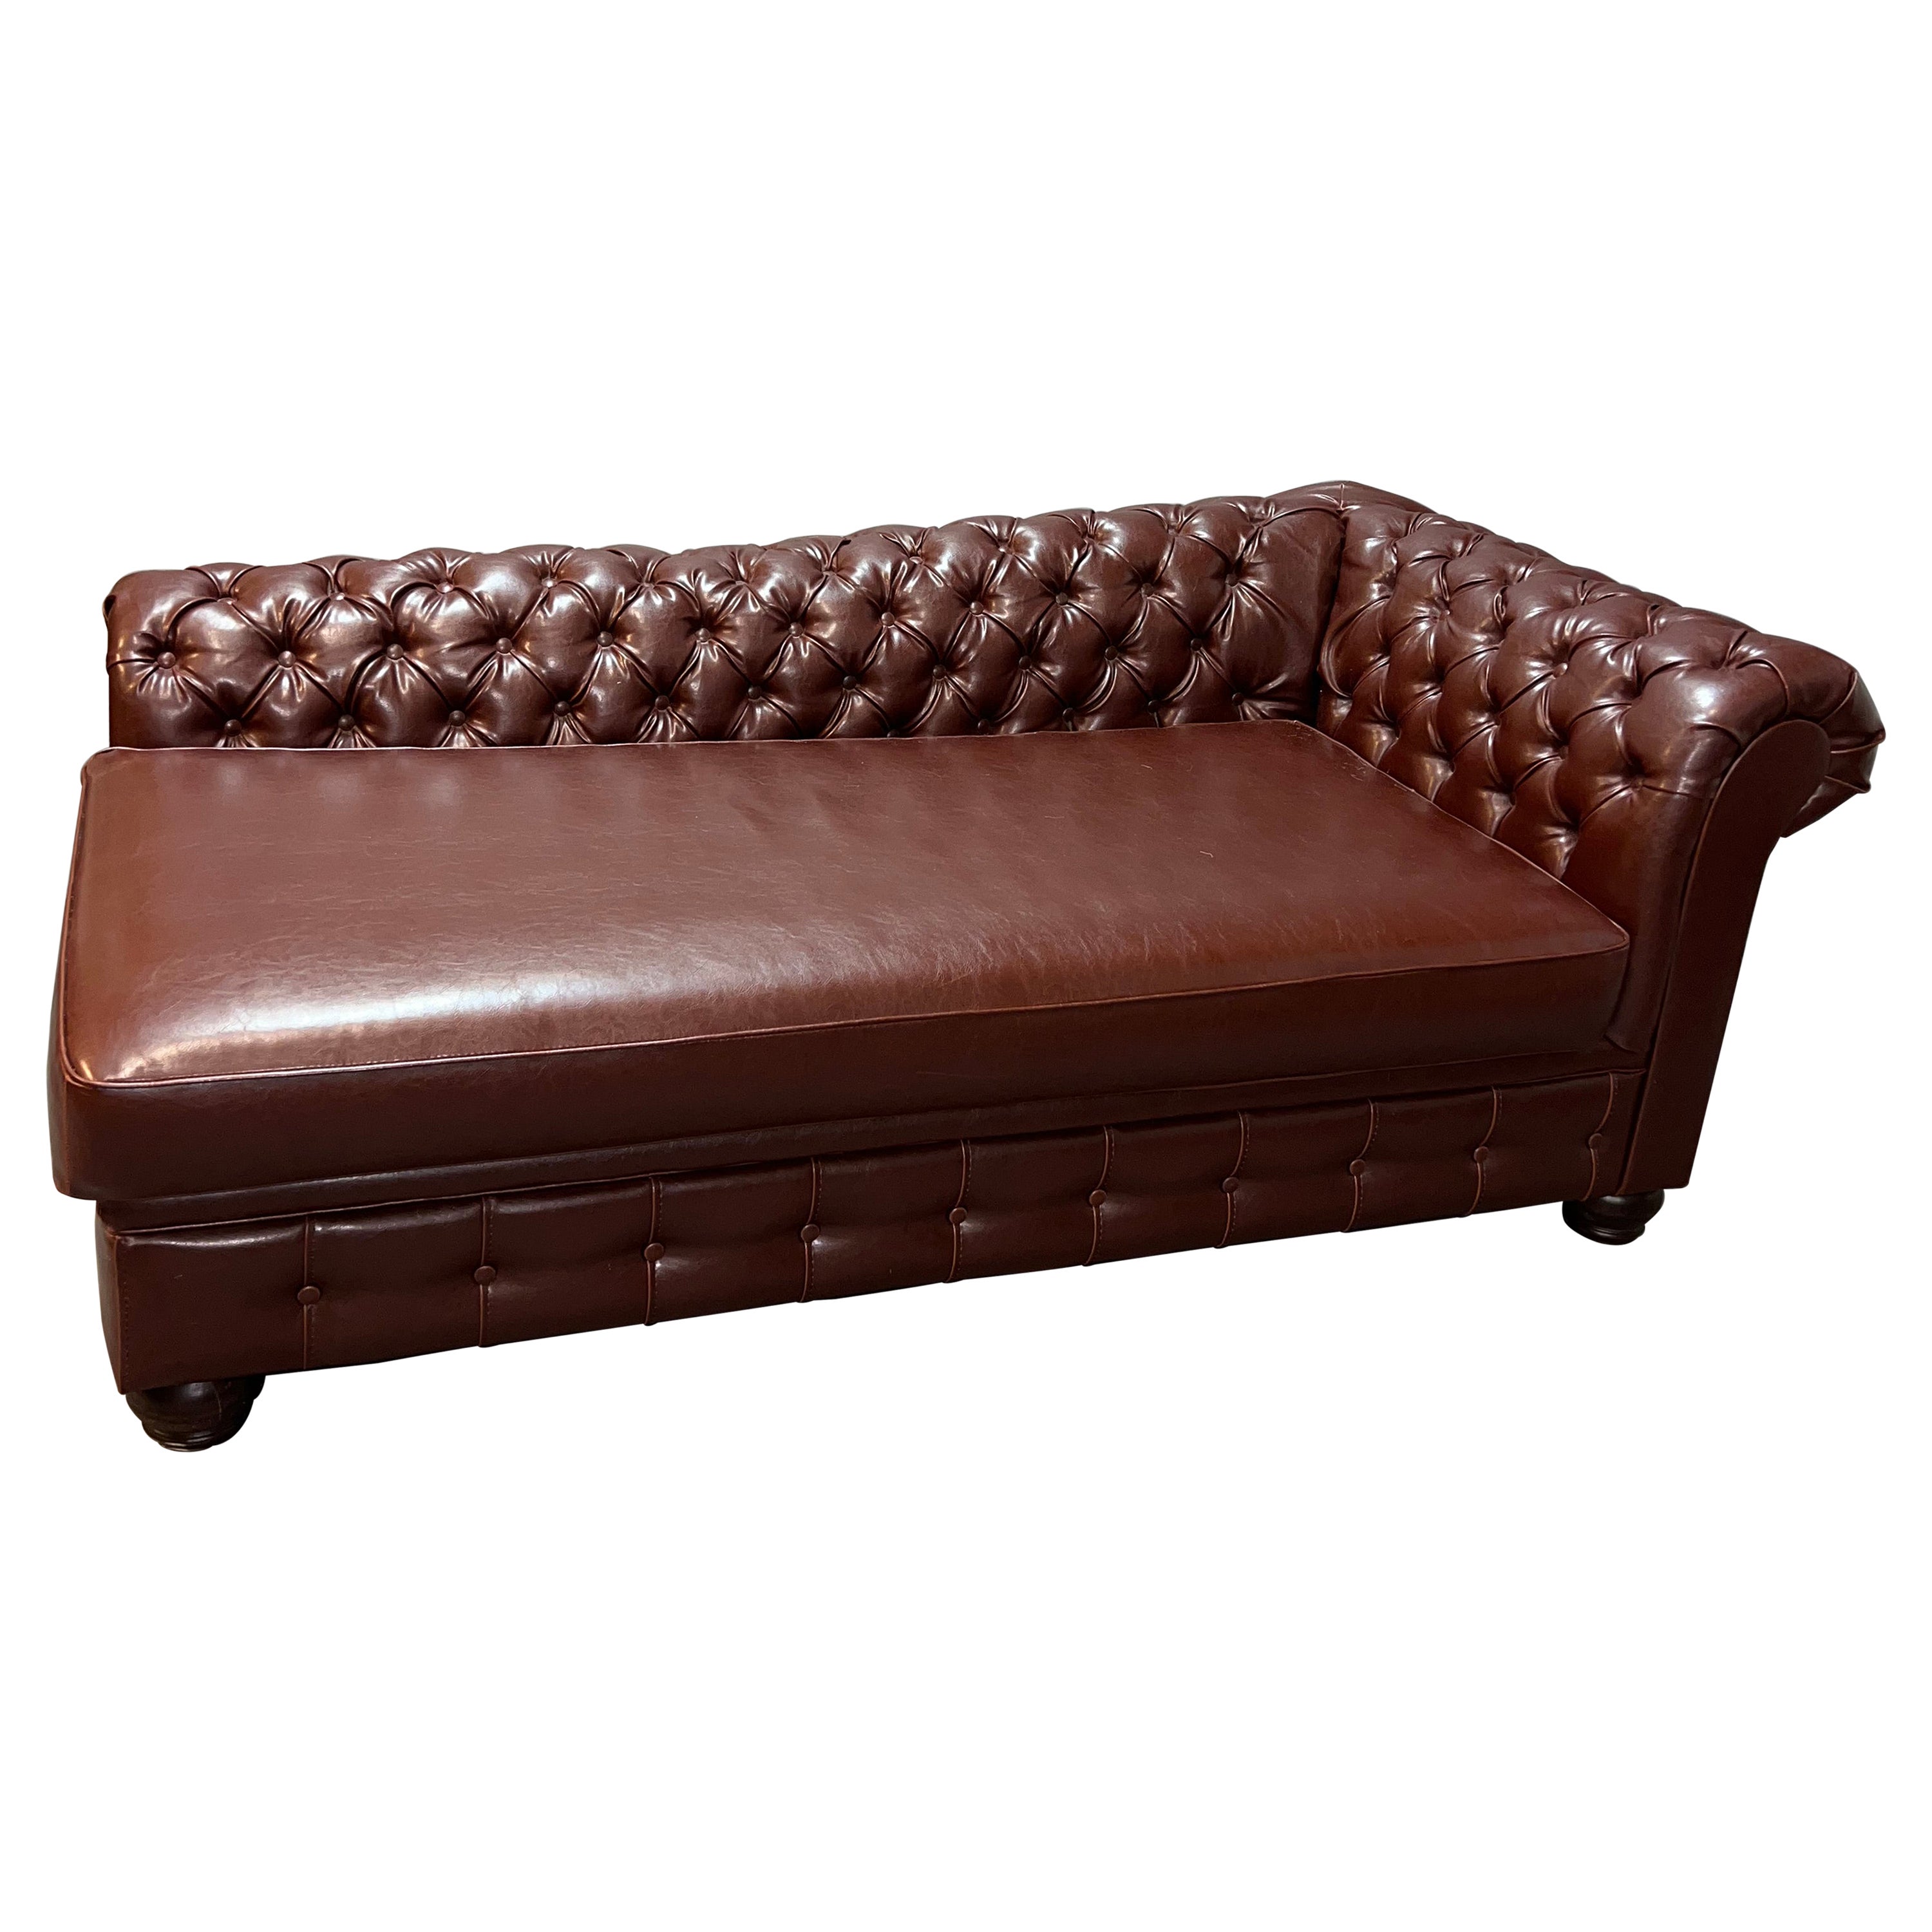 Lovely Vintage Chesterfield Brown Leather Look Chaise Lounge Daybed Sofa For Sale